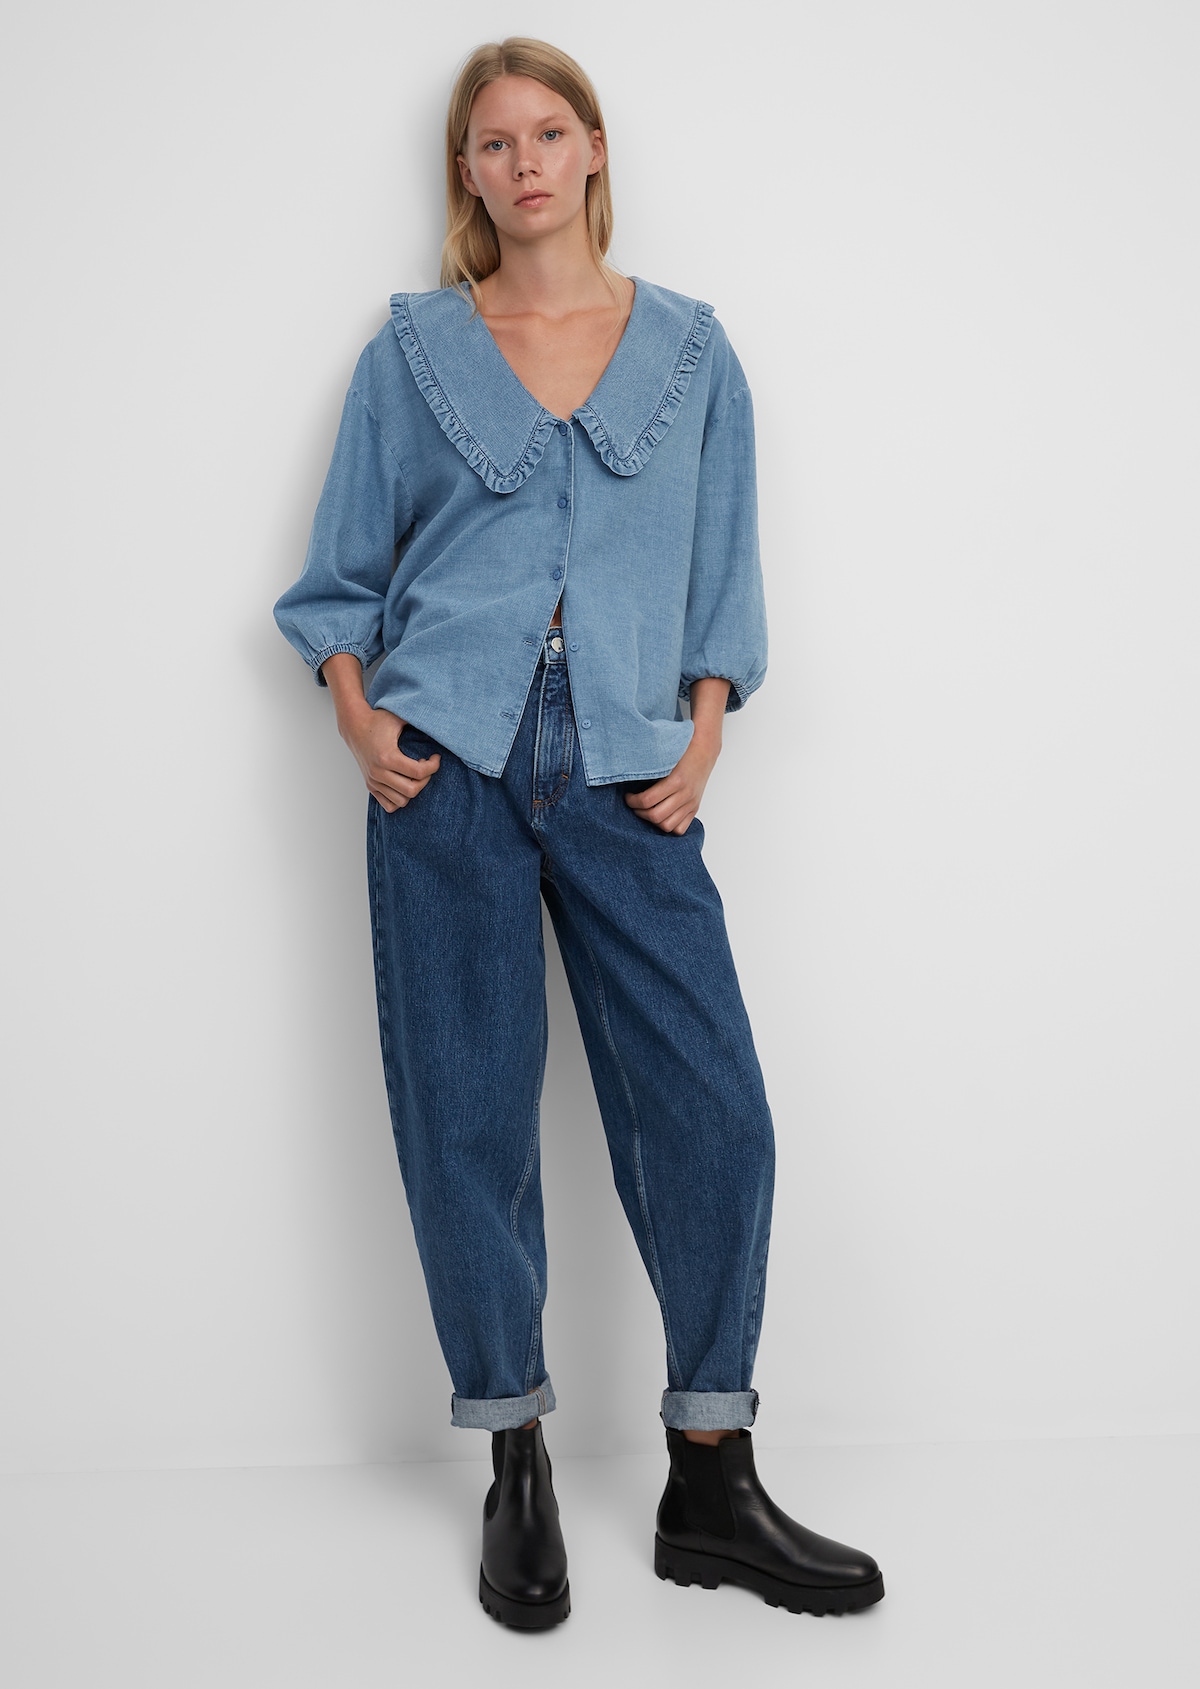 Statement blouse made from pure cotton - blue | Blouses | MARC O’POLO